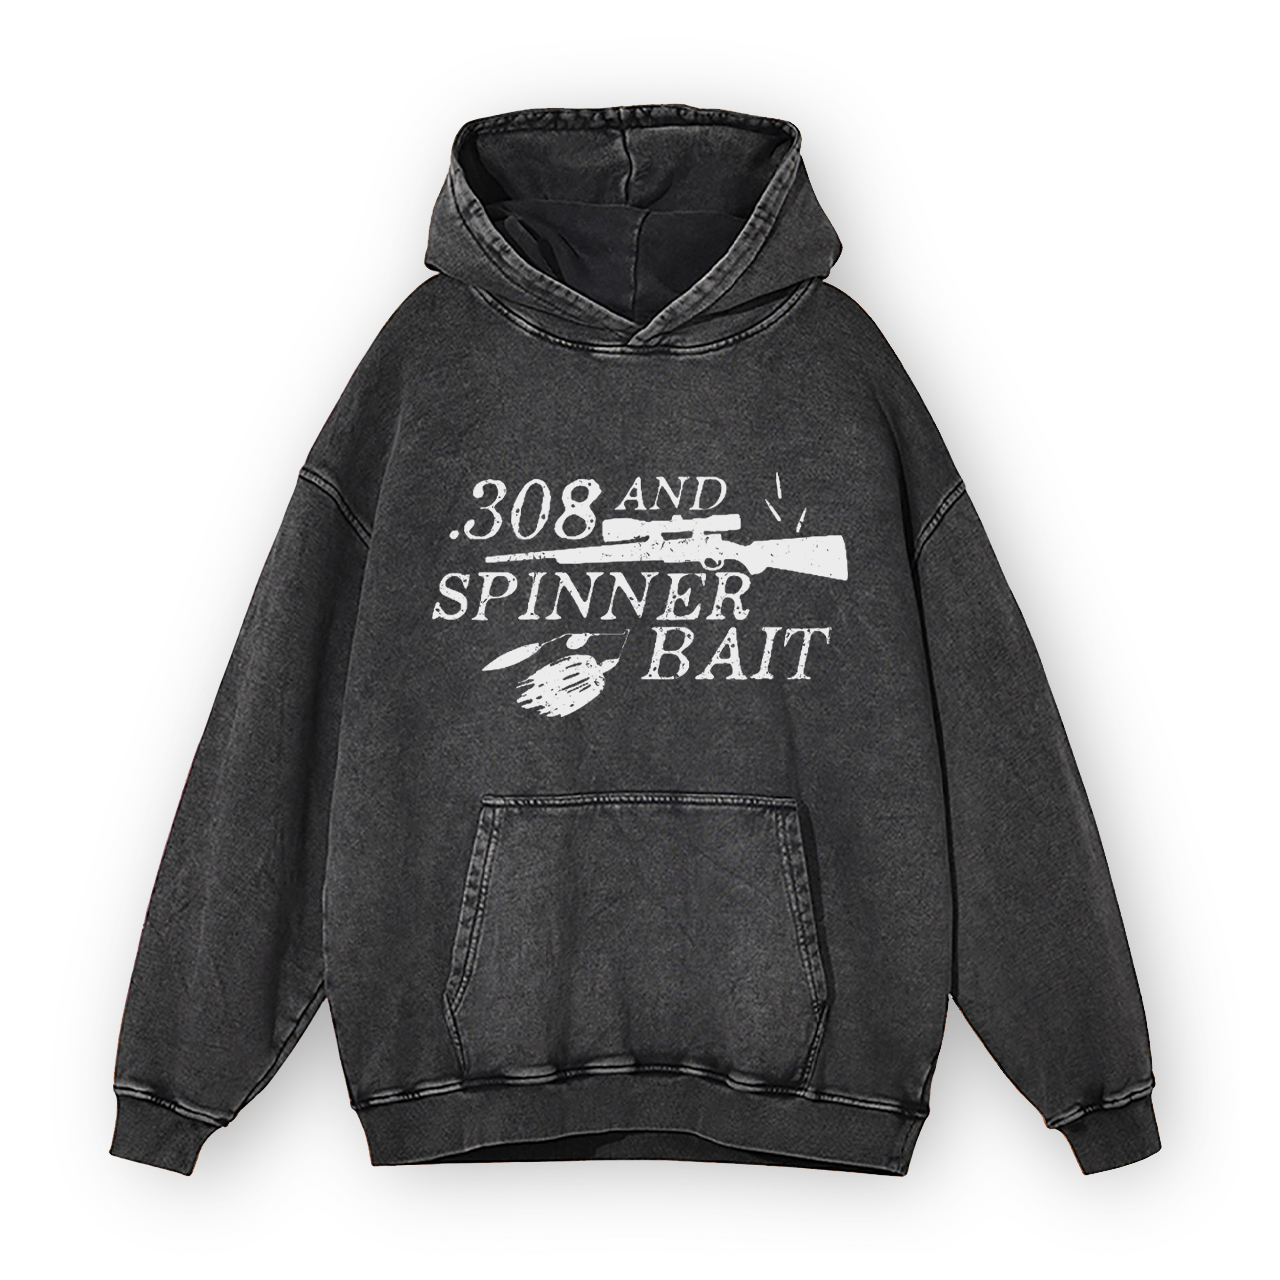 308 and Spinner Bait Funny Hunting and Fishing Garment-Dye Hoodies